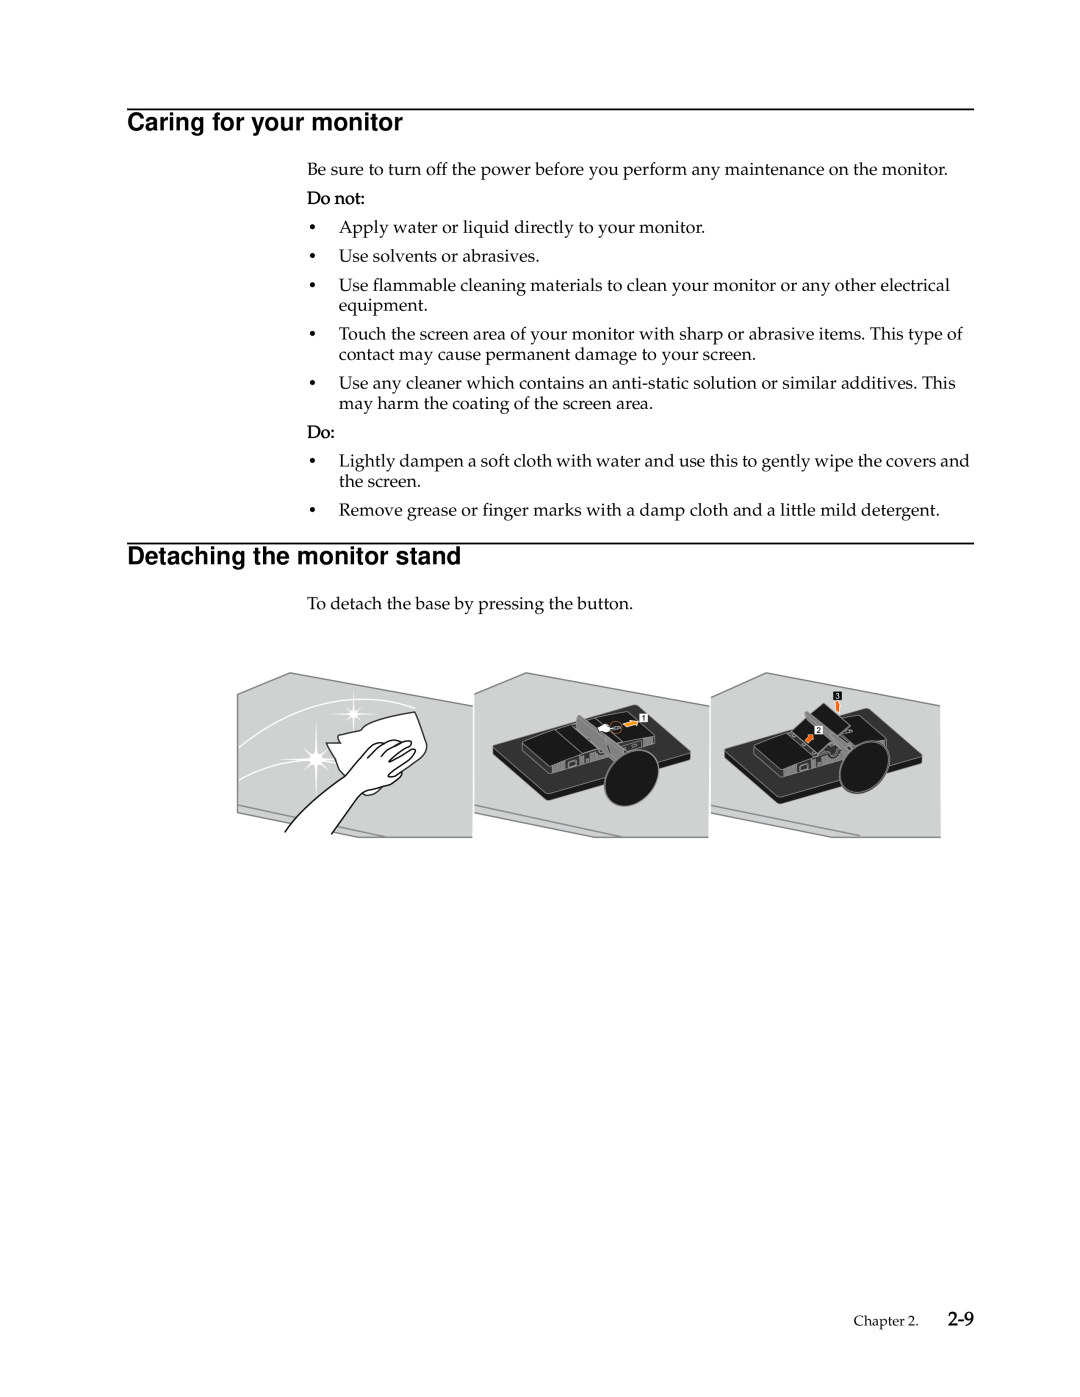 Lenovo 4432-HF1 manual Caring for your monitor, Detaching the monitor stand, Do not 